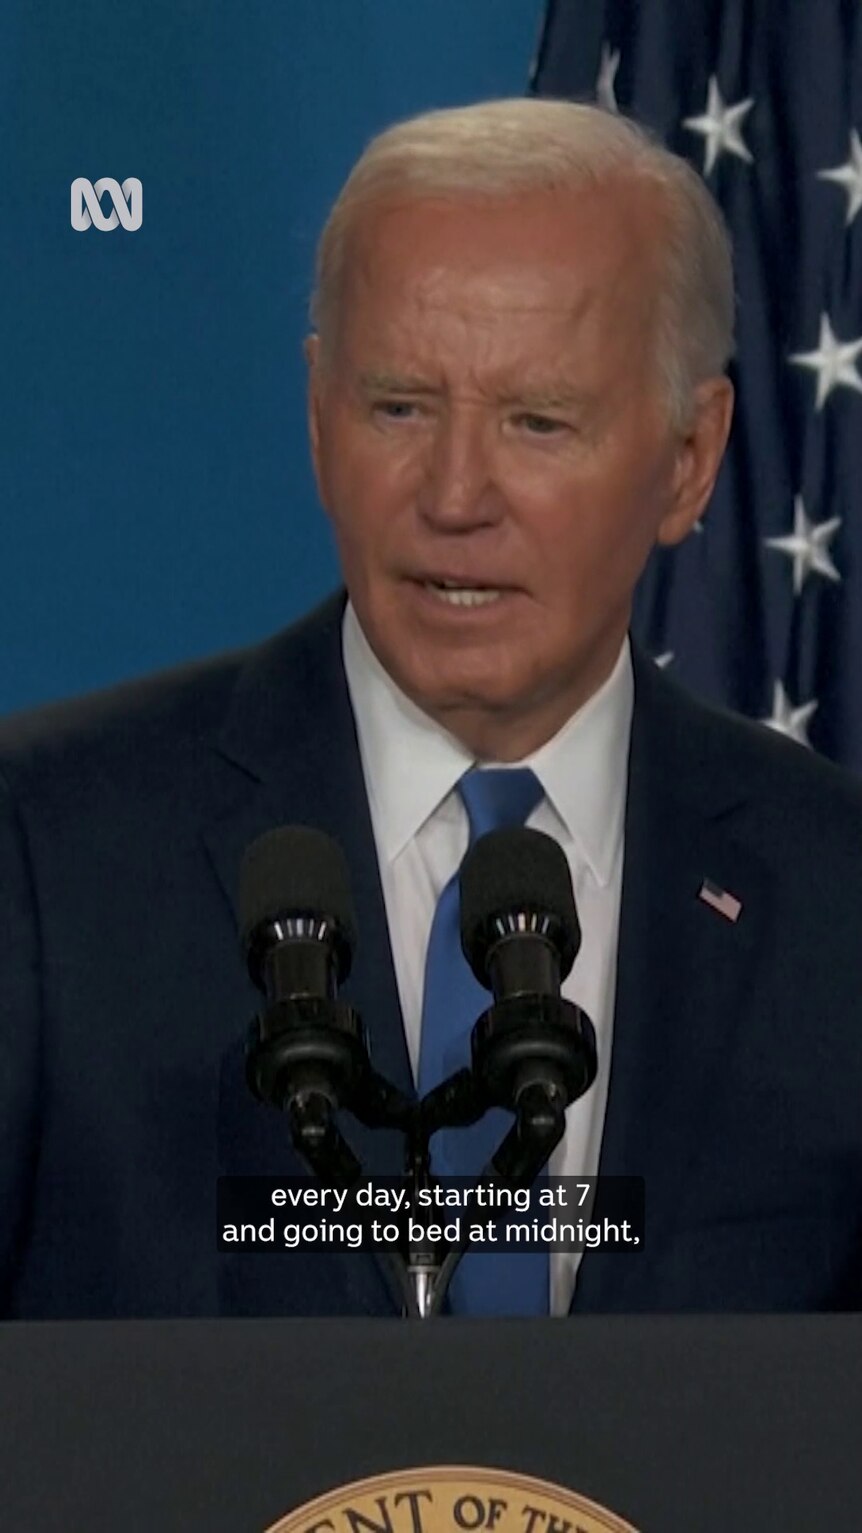 Wearing a suit Joe Biden stands at a lectern with a US flag visible behind him